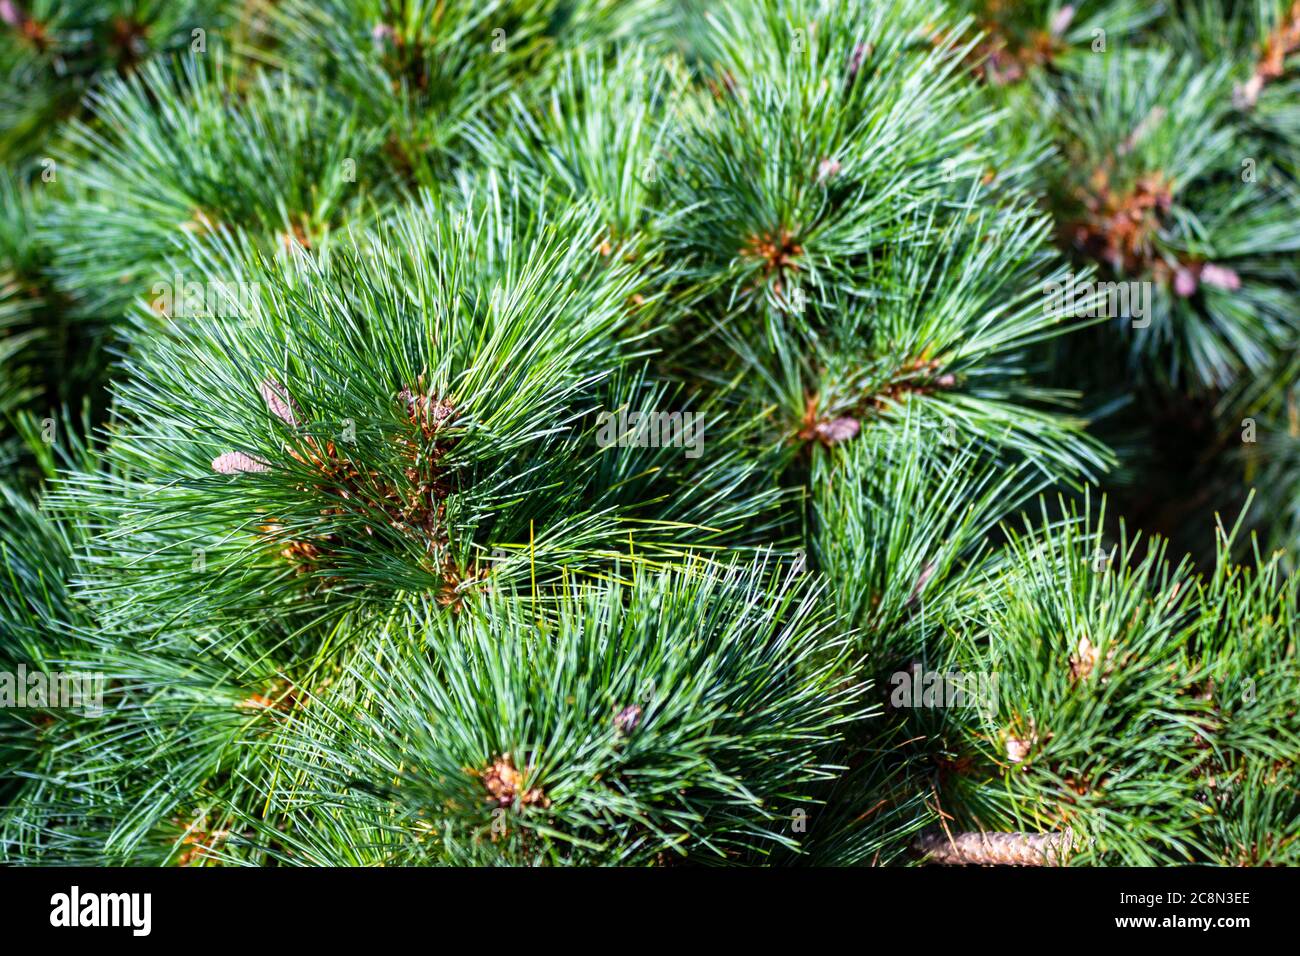 Closeup from Cedar branches with long fluffy needles with a beautiful blurry background. Pinus sibirica, or Siberian pine. Pine branch with long and t Stock Photo